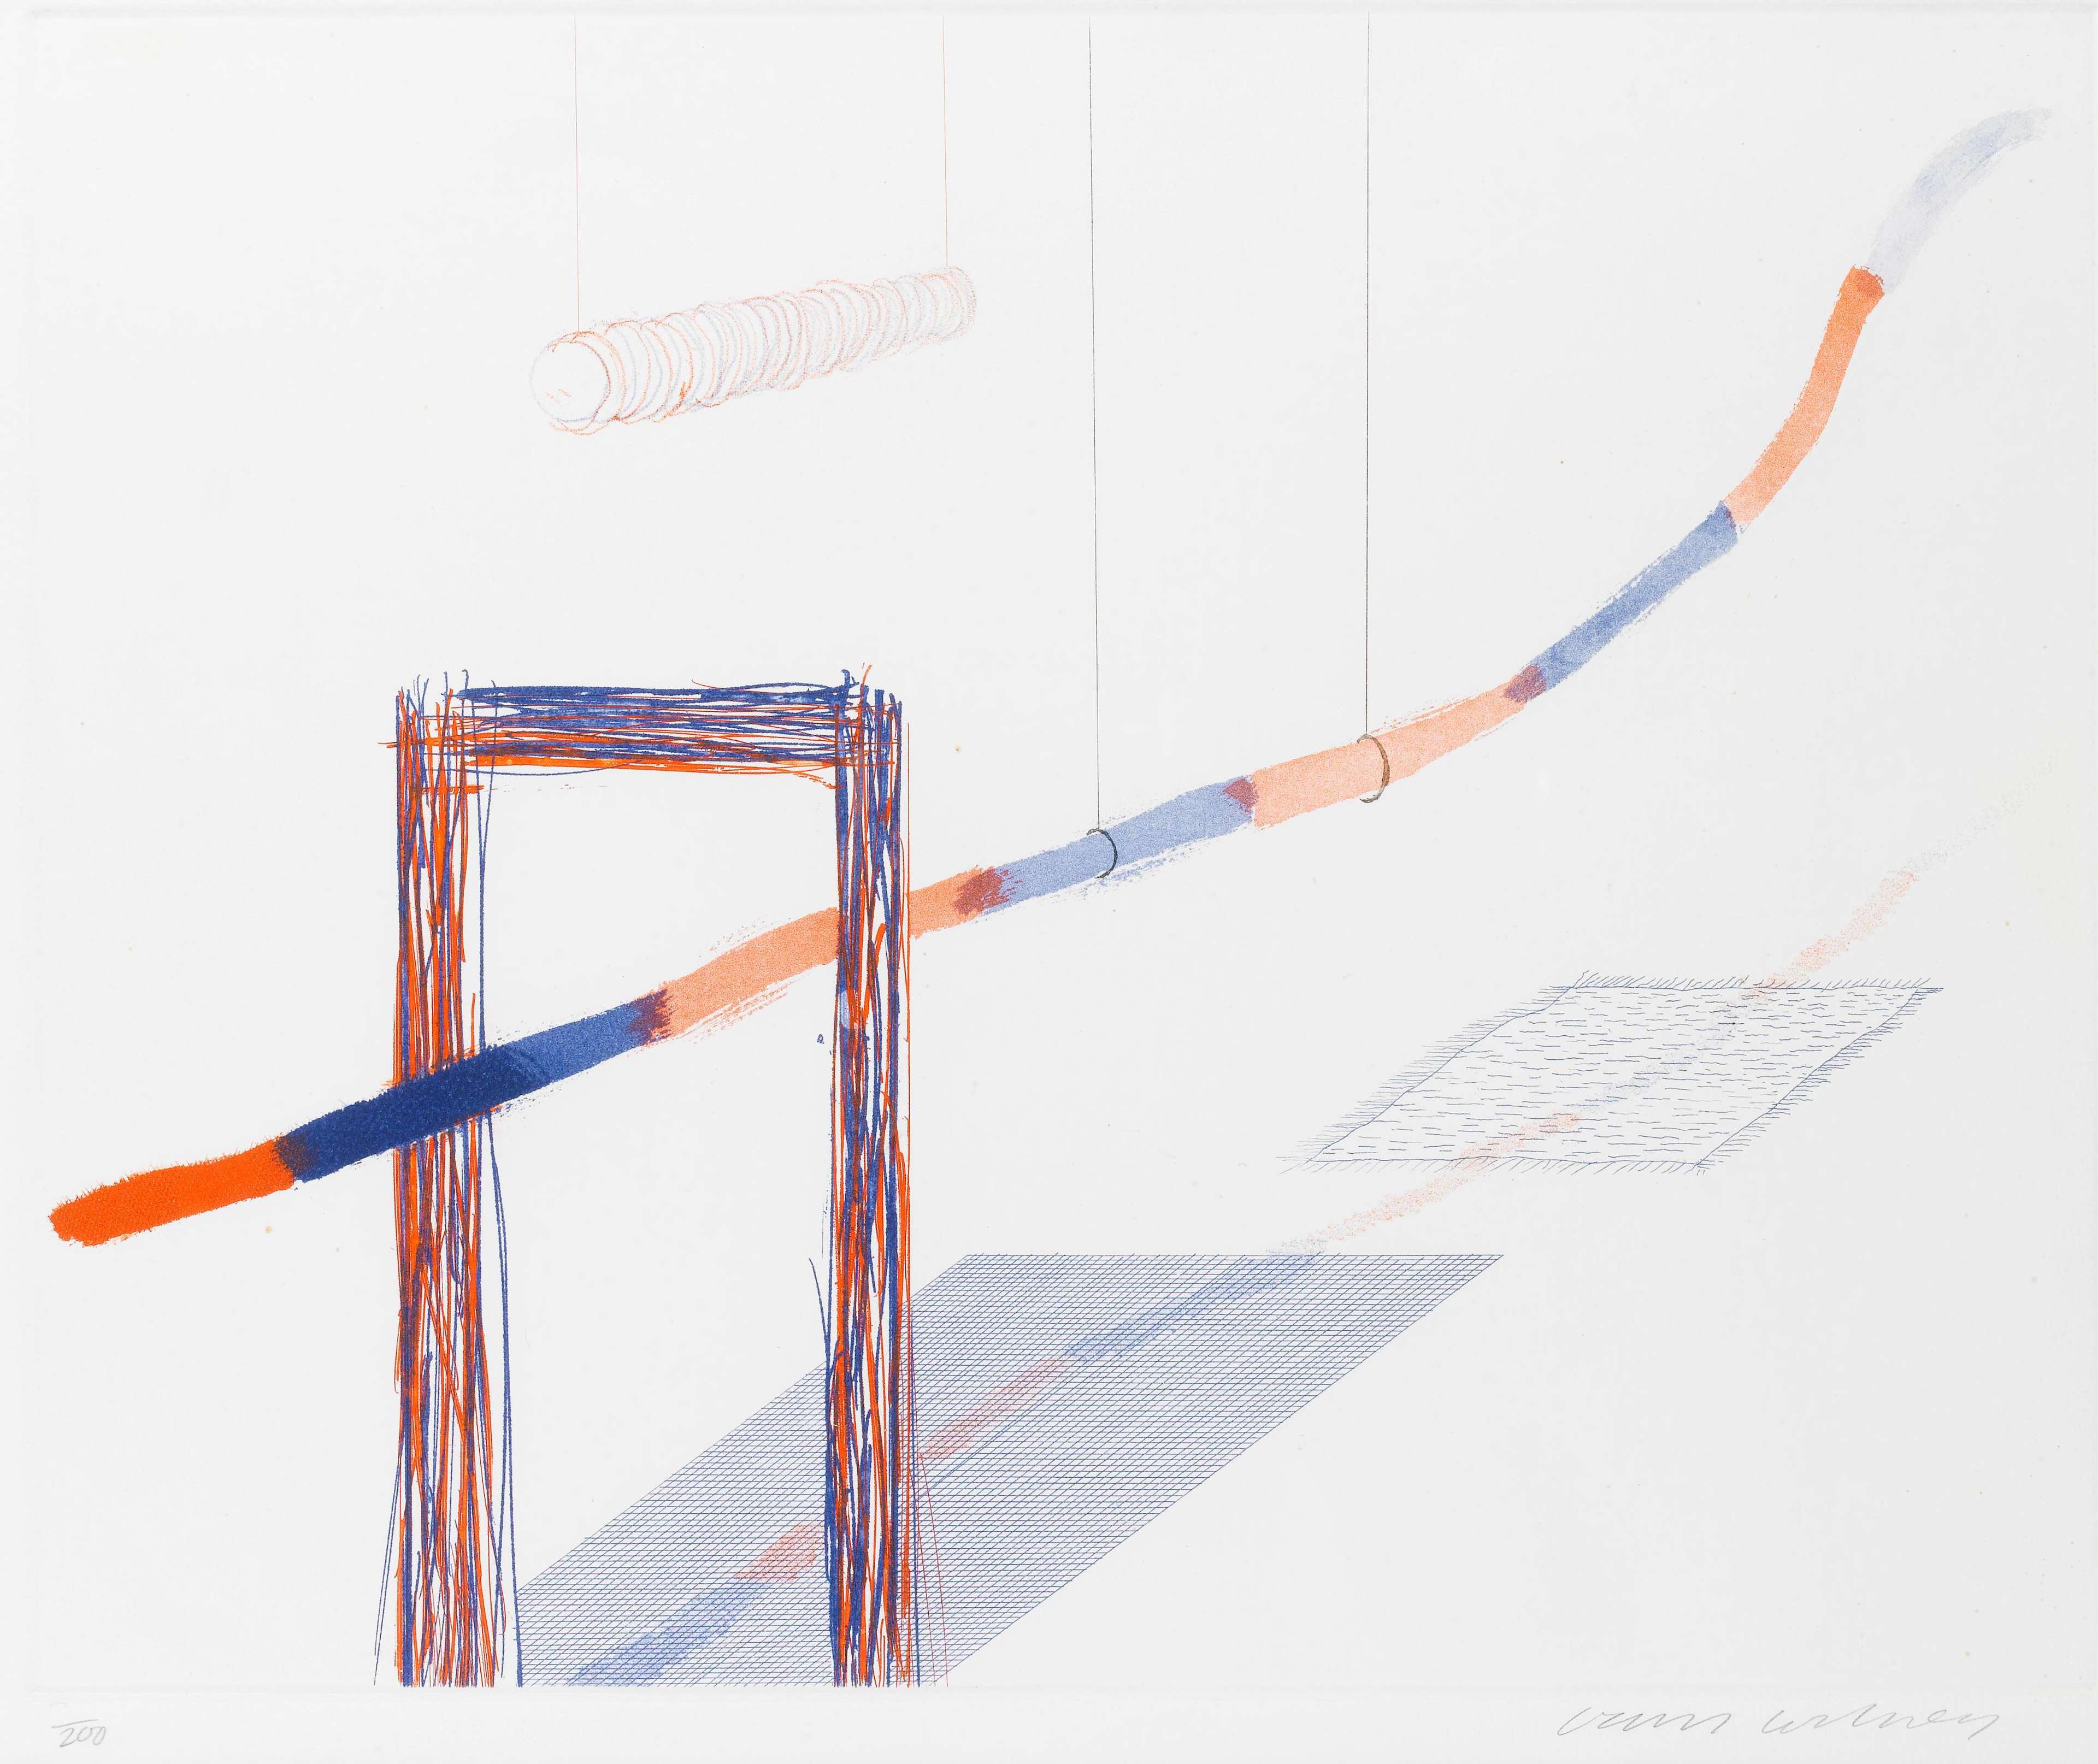 David Hockney’s It Picks Its Way. An intaglio print of an orange and blue tube floating through a doorway.